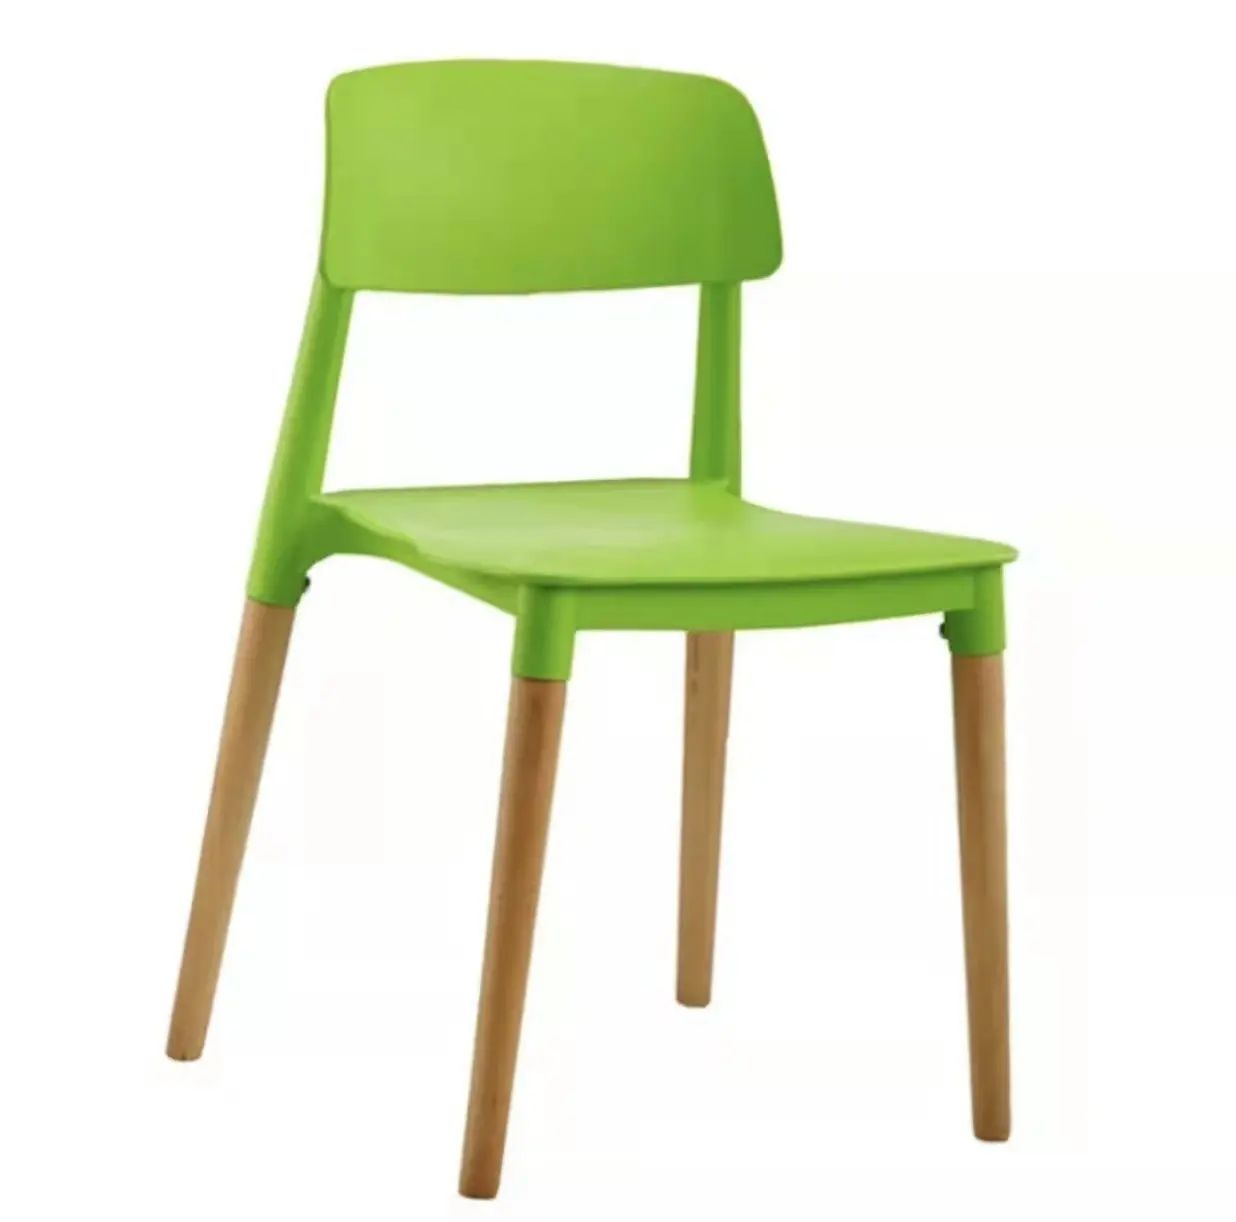 COMNENIR nordic leisure cafe stackable buy plastic chairs seat with wooden legs manufactures